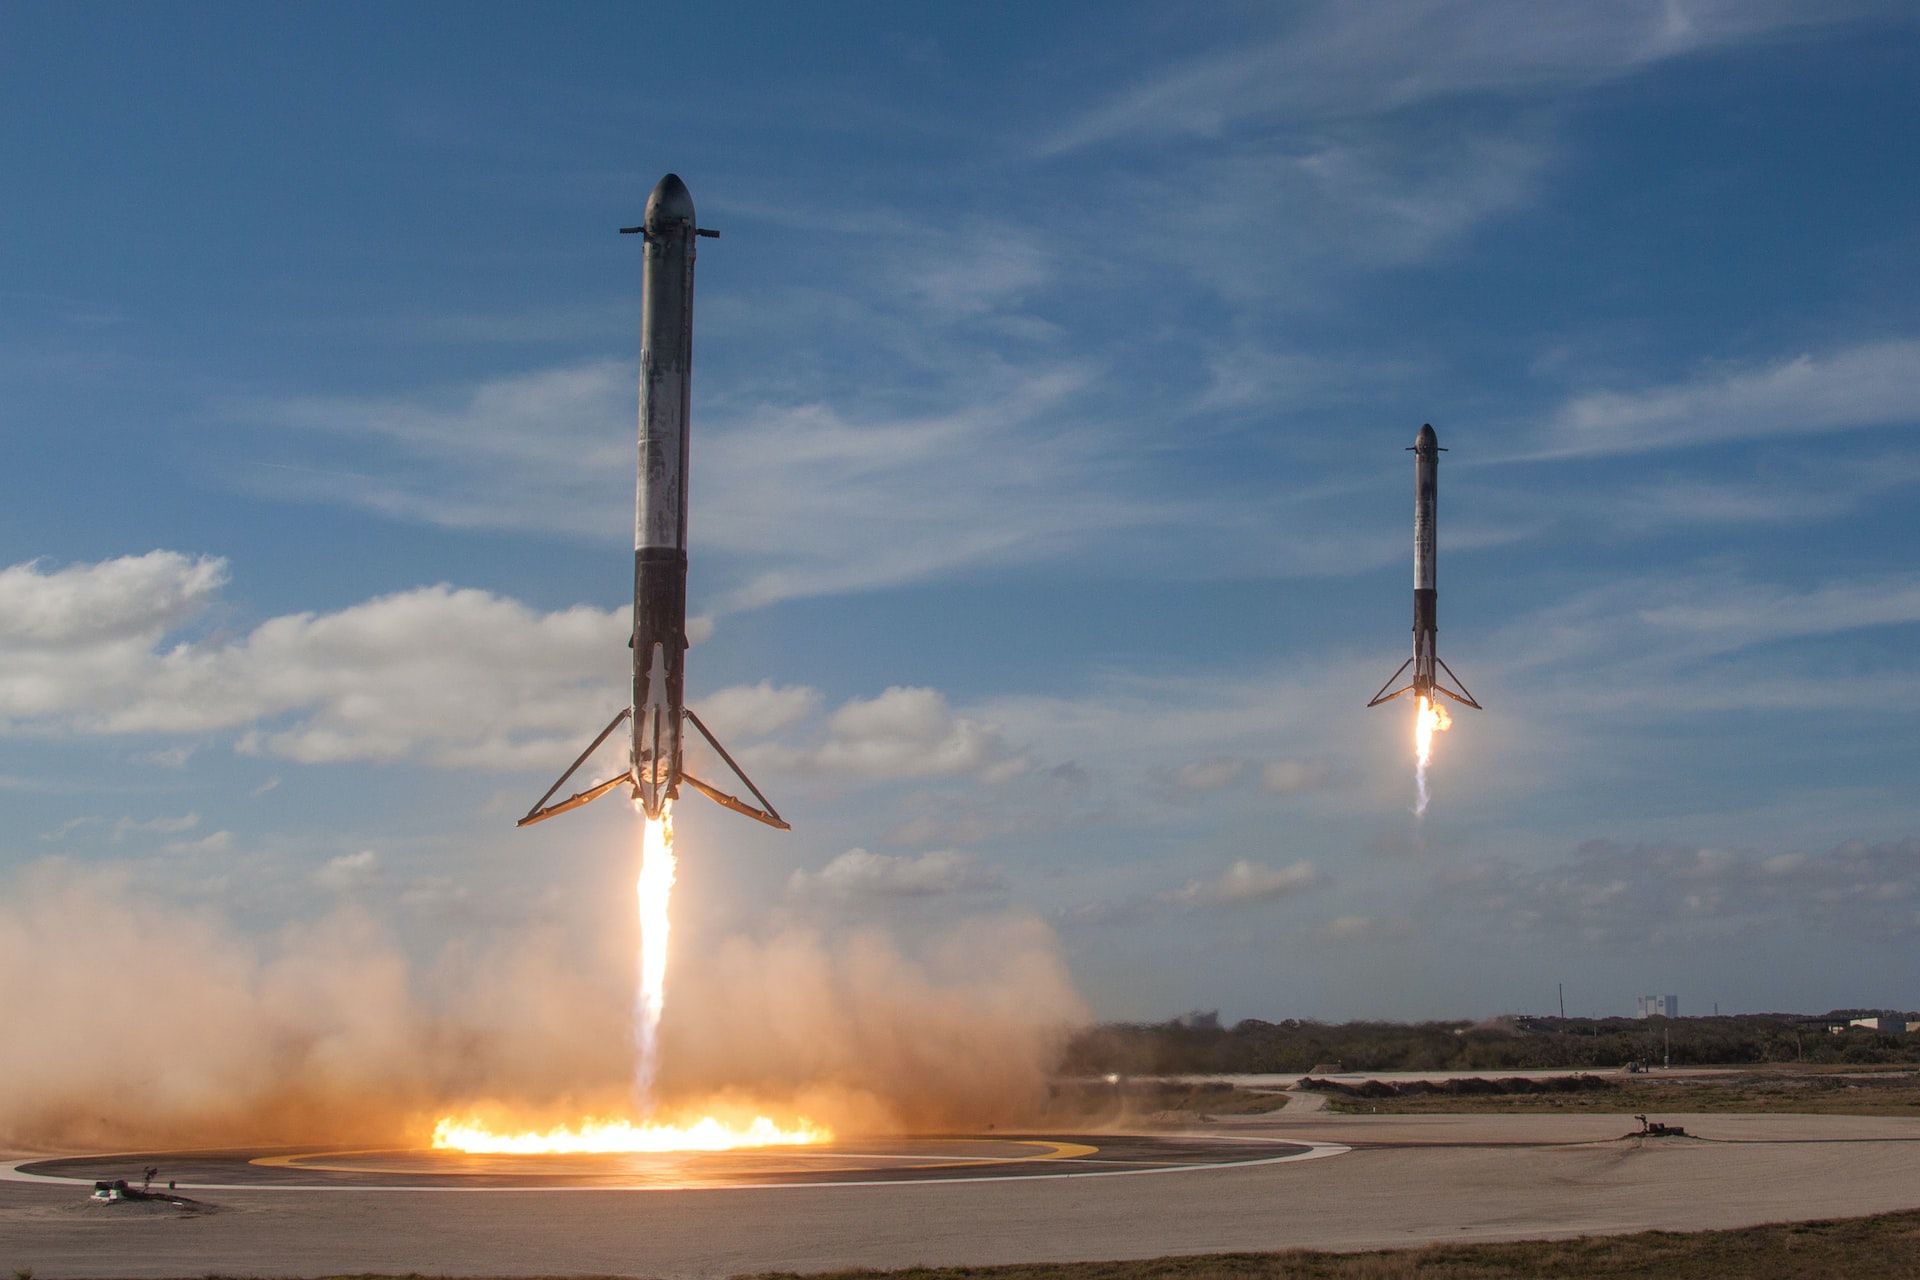 The Benefits of SpaceX’s Reusable Rockets and Its Effect on the Environment